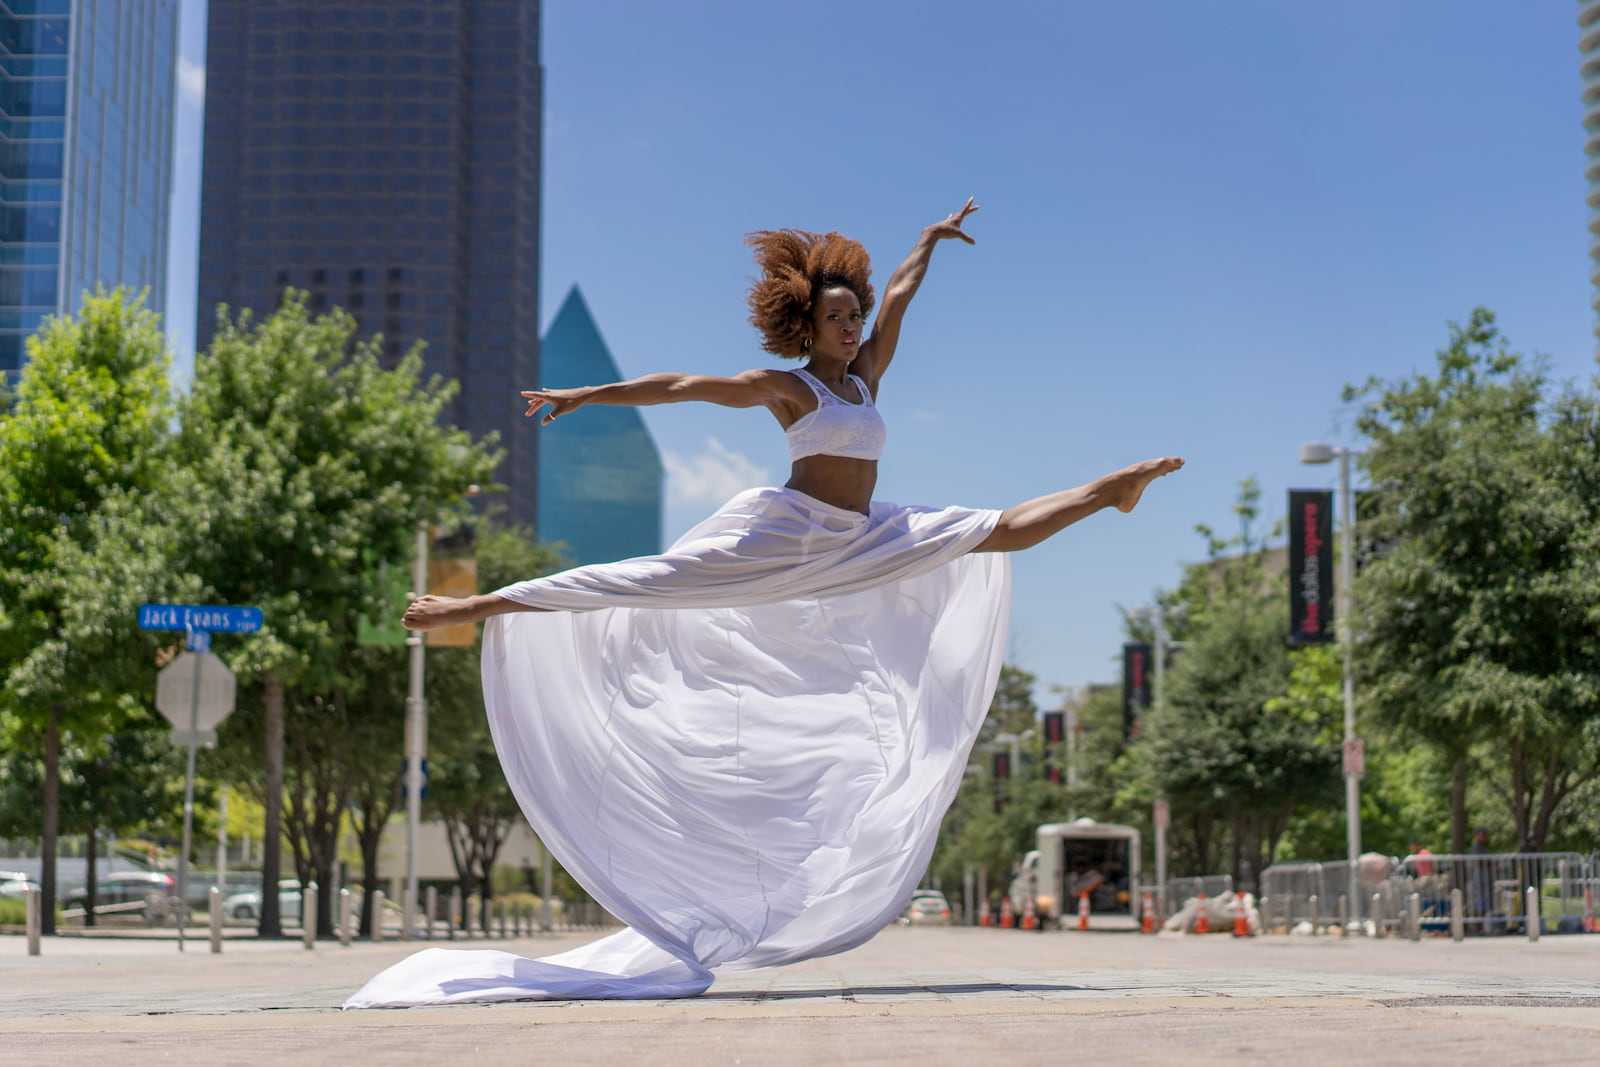 Dancer from the Dallas Black Dance Company, a Bloomberg Philanthropies Arts Innovation and Management grantee.